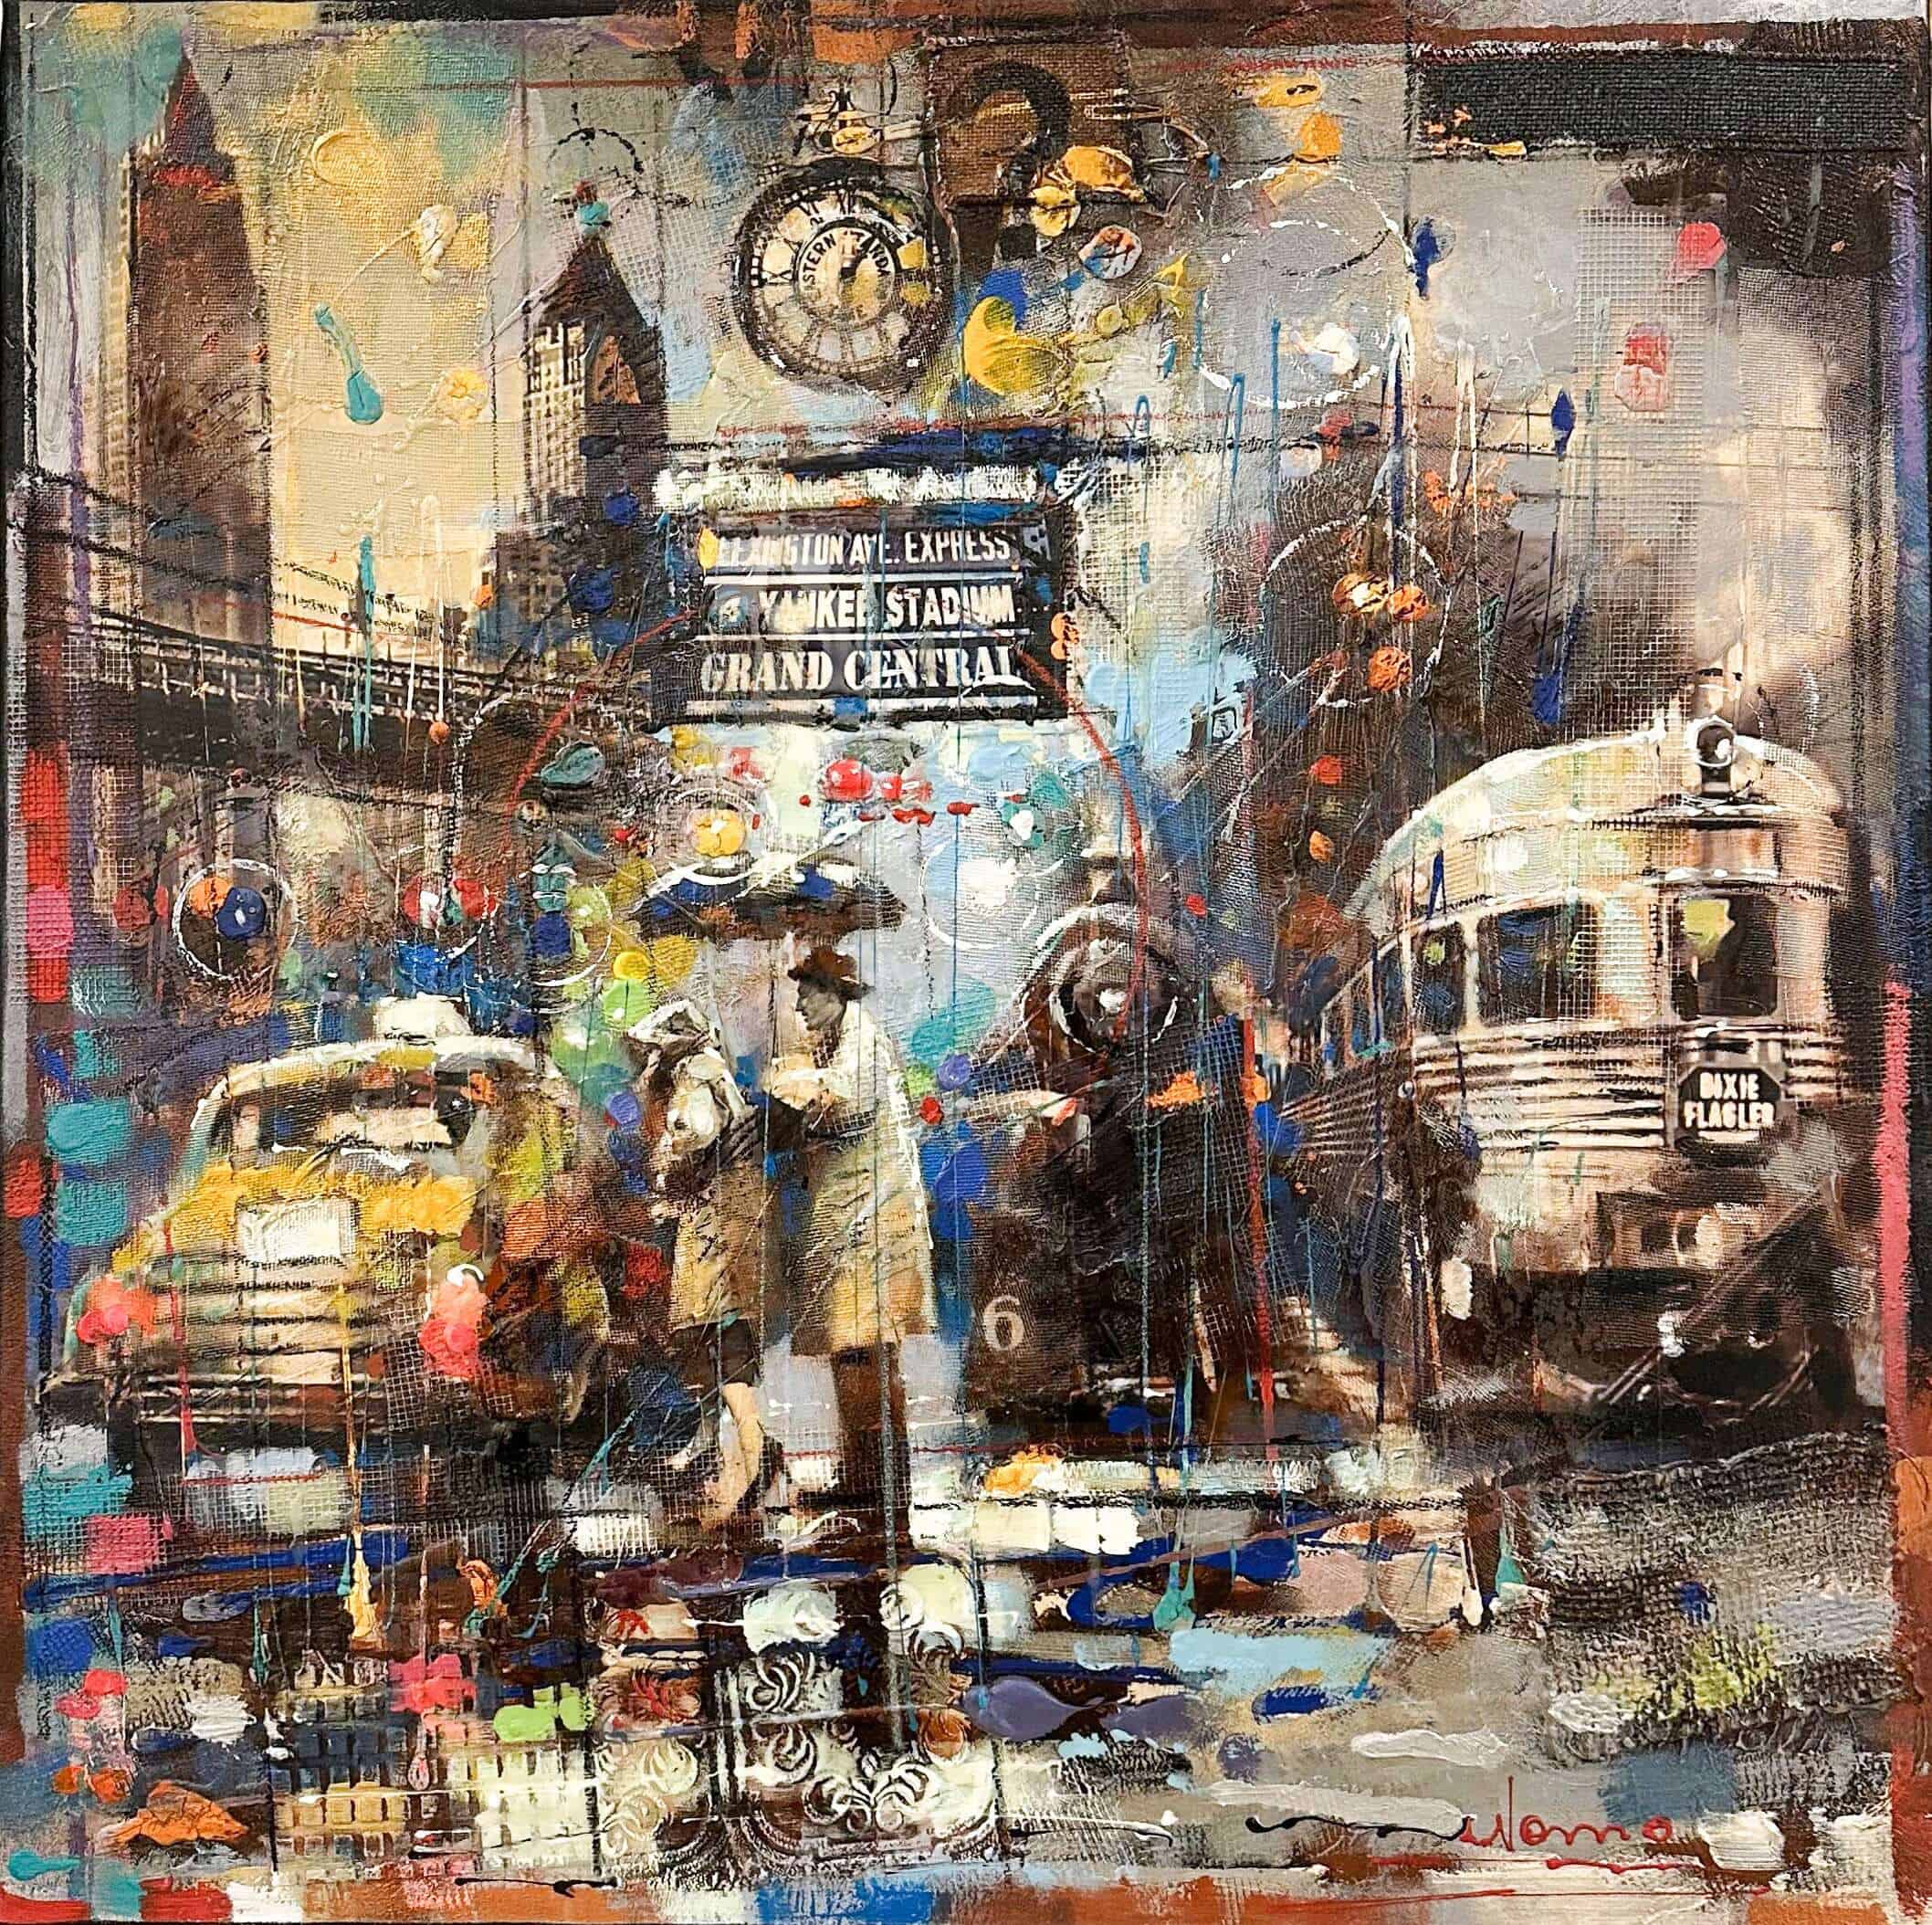 Contemporary art. Title: Taxi Has Arrived, 30x30 inches, Mixed Media on canvas by Canadian artist Victor Nemo.